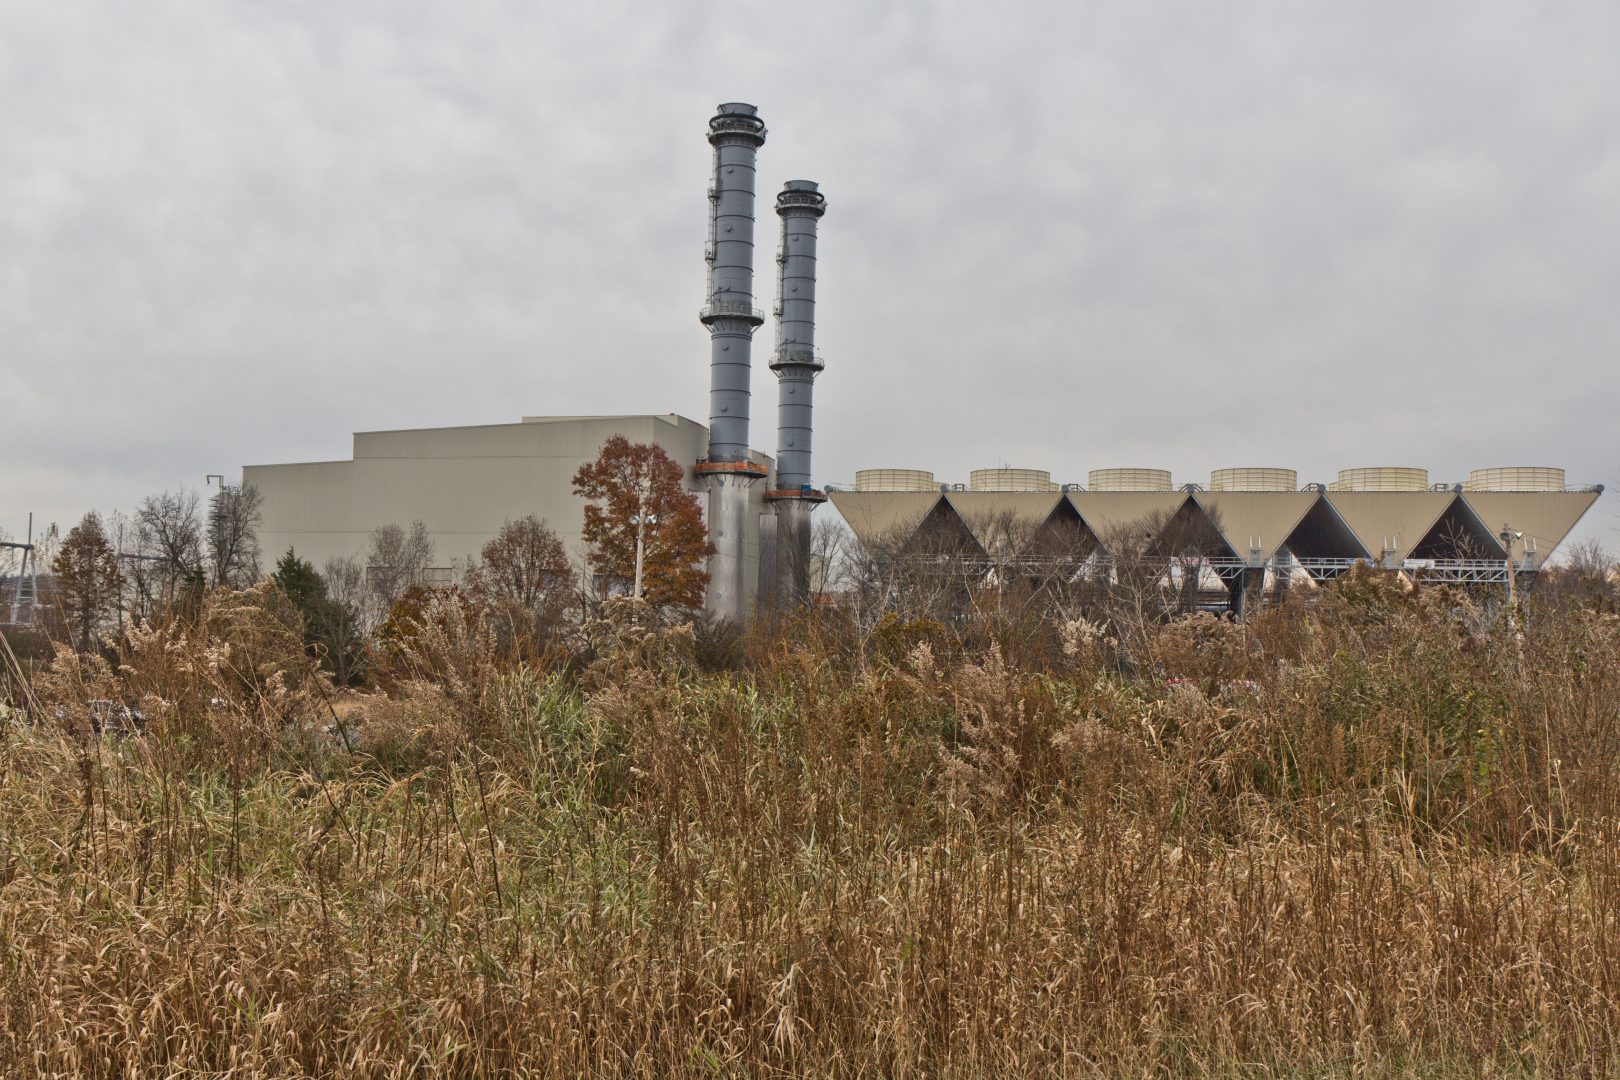 CPV's Valley Energy Center in Wawayanda, NY sits on 122 acres and would generate 650 megawatts of power. It will rely on Marcellus Shale gas from Pennsylvania.